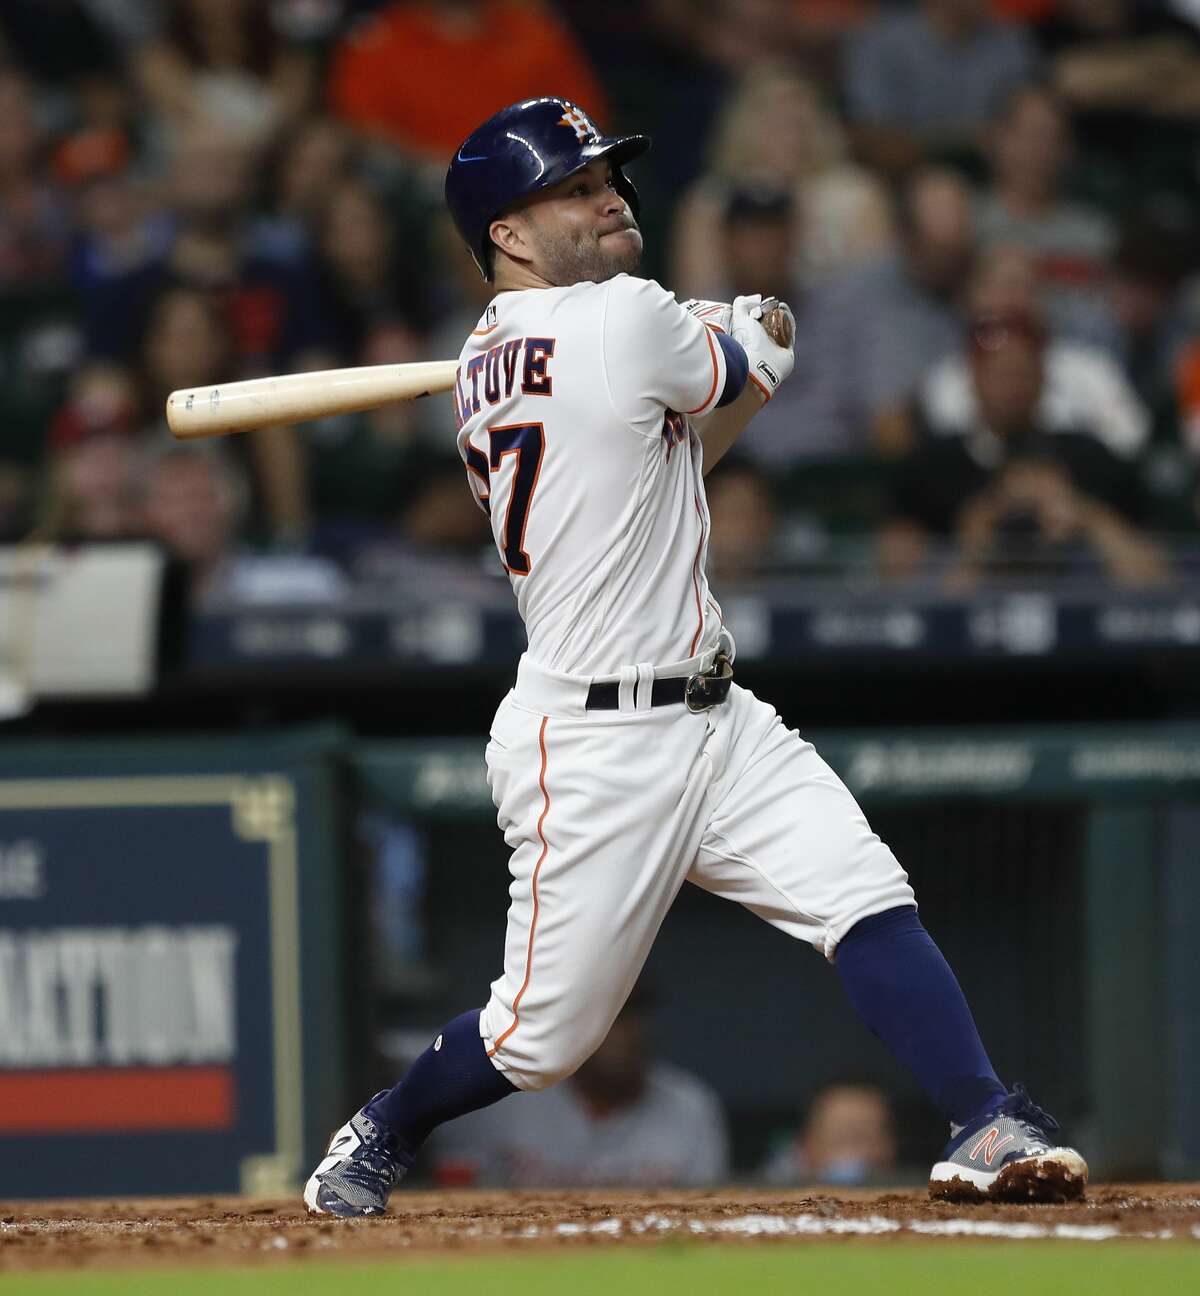 Houston Astros Jose Altuve (27) hits a triple in the fourth inning of an MLB baseball game at Minute Maid Park, Wednesday, Aug. 23, 2017, in Houston. ( Karen Warren / Houston Chronicle )